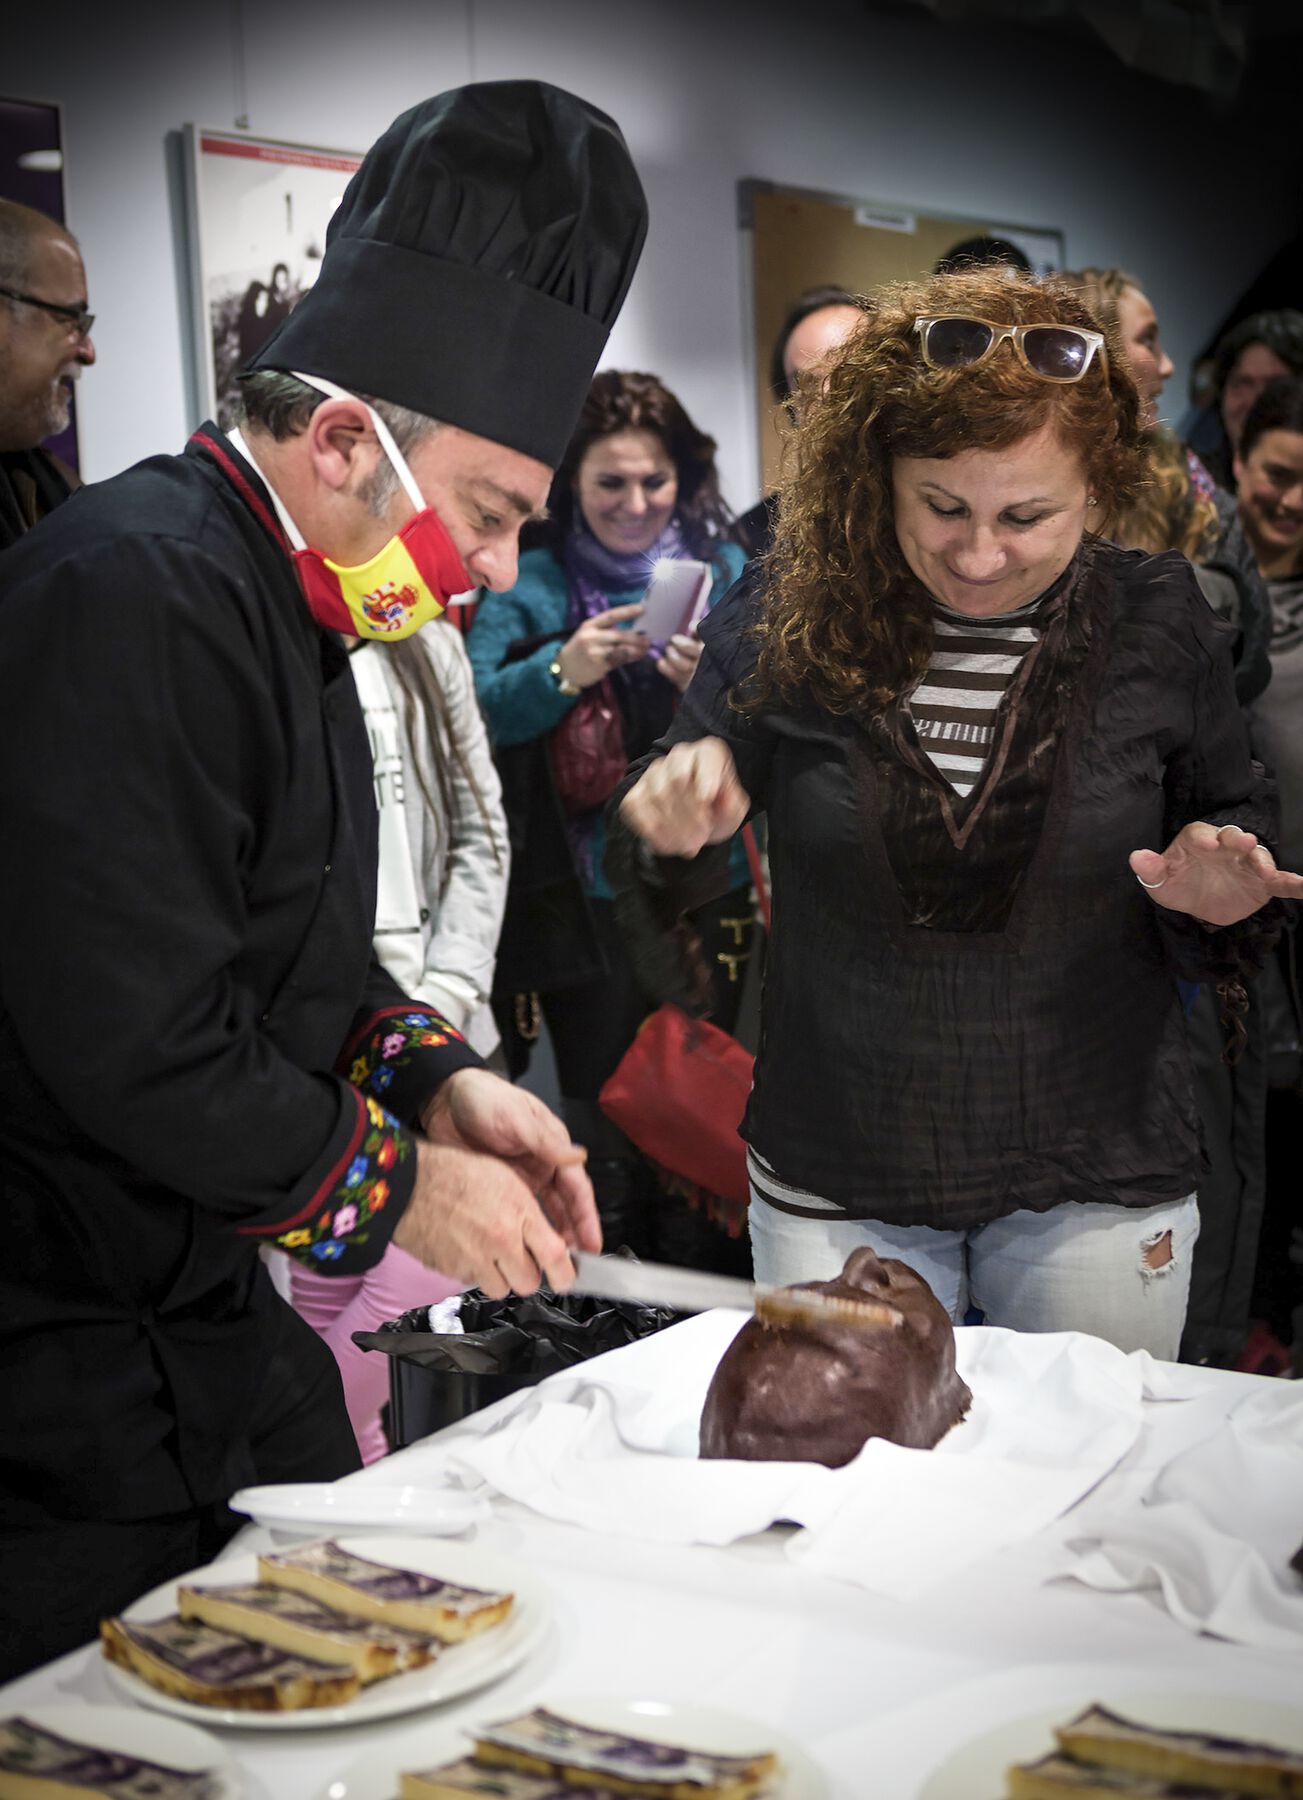 A man cutting a chocolate head sculpture starting from the forehead while a woman stands right next to him being surprised